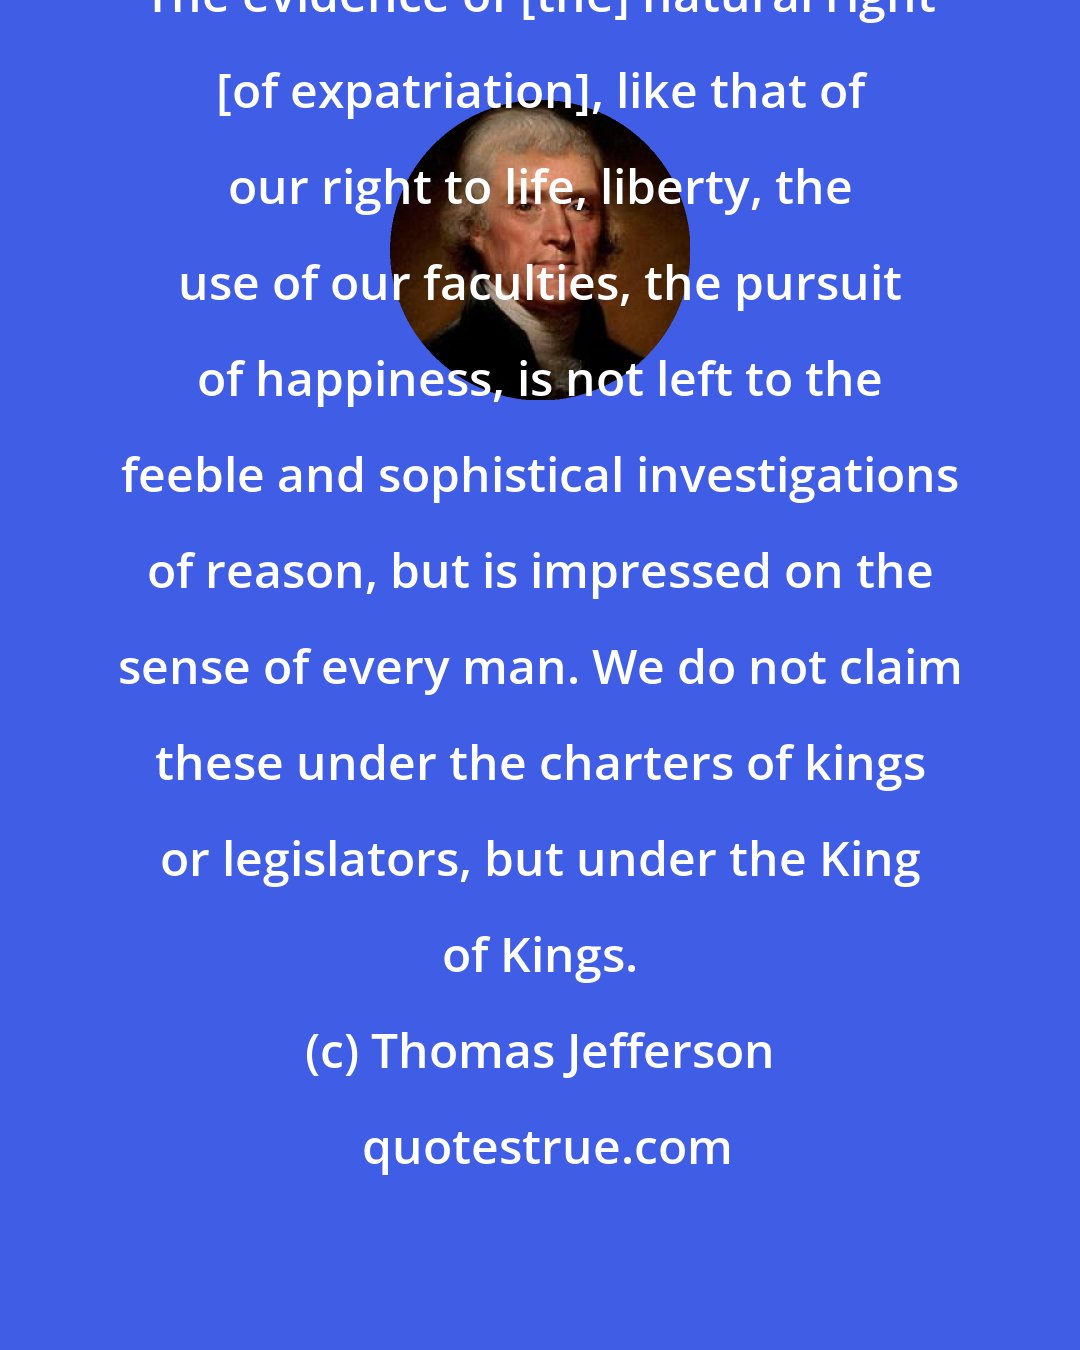 Thomas Jefferson: The evidence of [the] natural right [of expatriation], like that of our right to life, liberty, the use of our faculties, the pursuit of happiness, is not left to the feeble and sophistical investigations of reason, but is impressed on the sense of every man. We do not claim these under the charters of kings or legislators, but under the King of Kings.